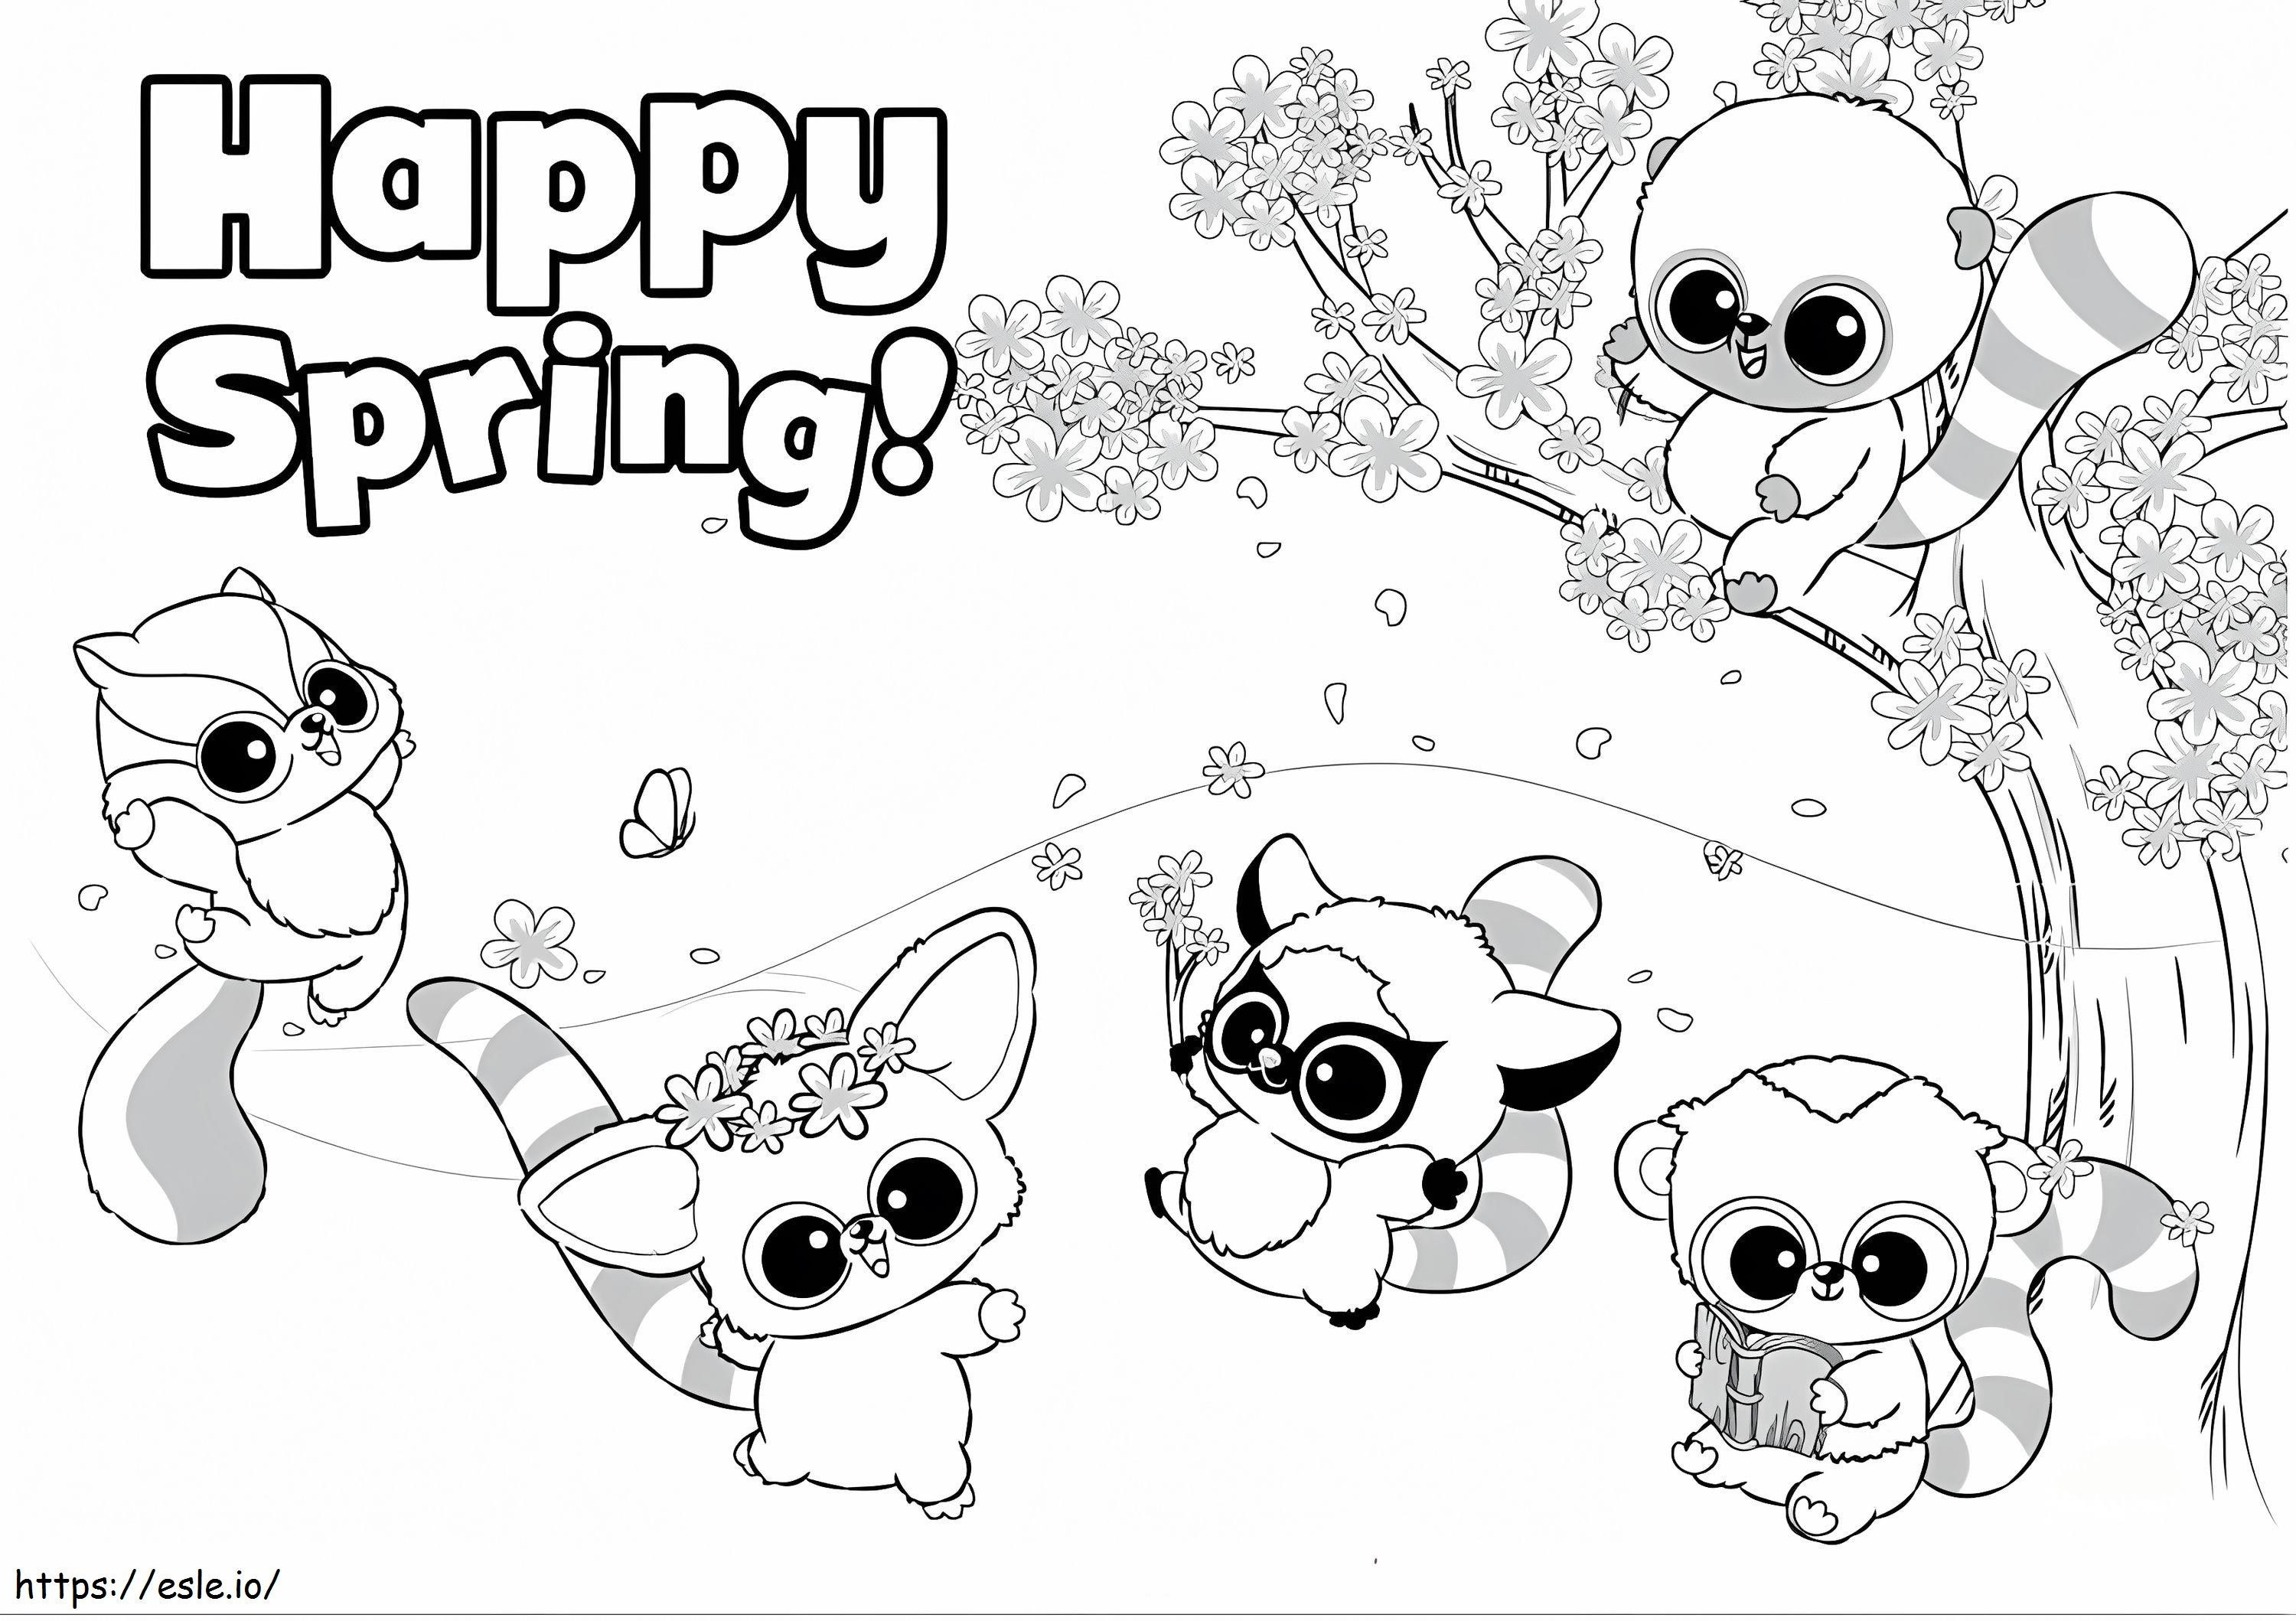 Happy Spring YooHoo And Friends coloring page